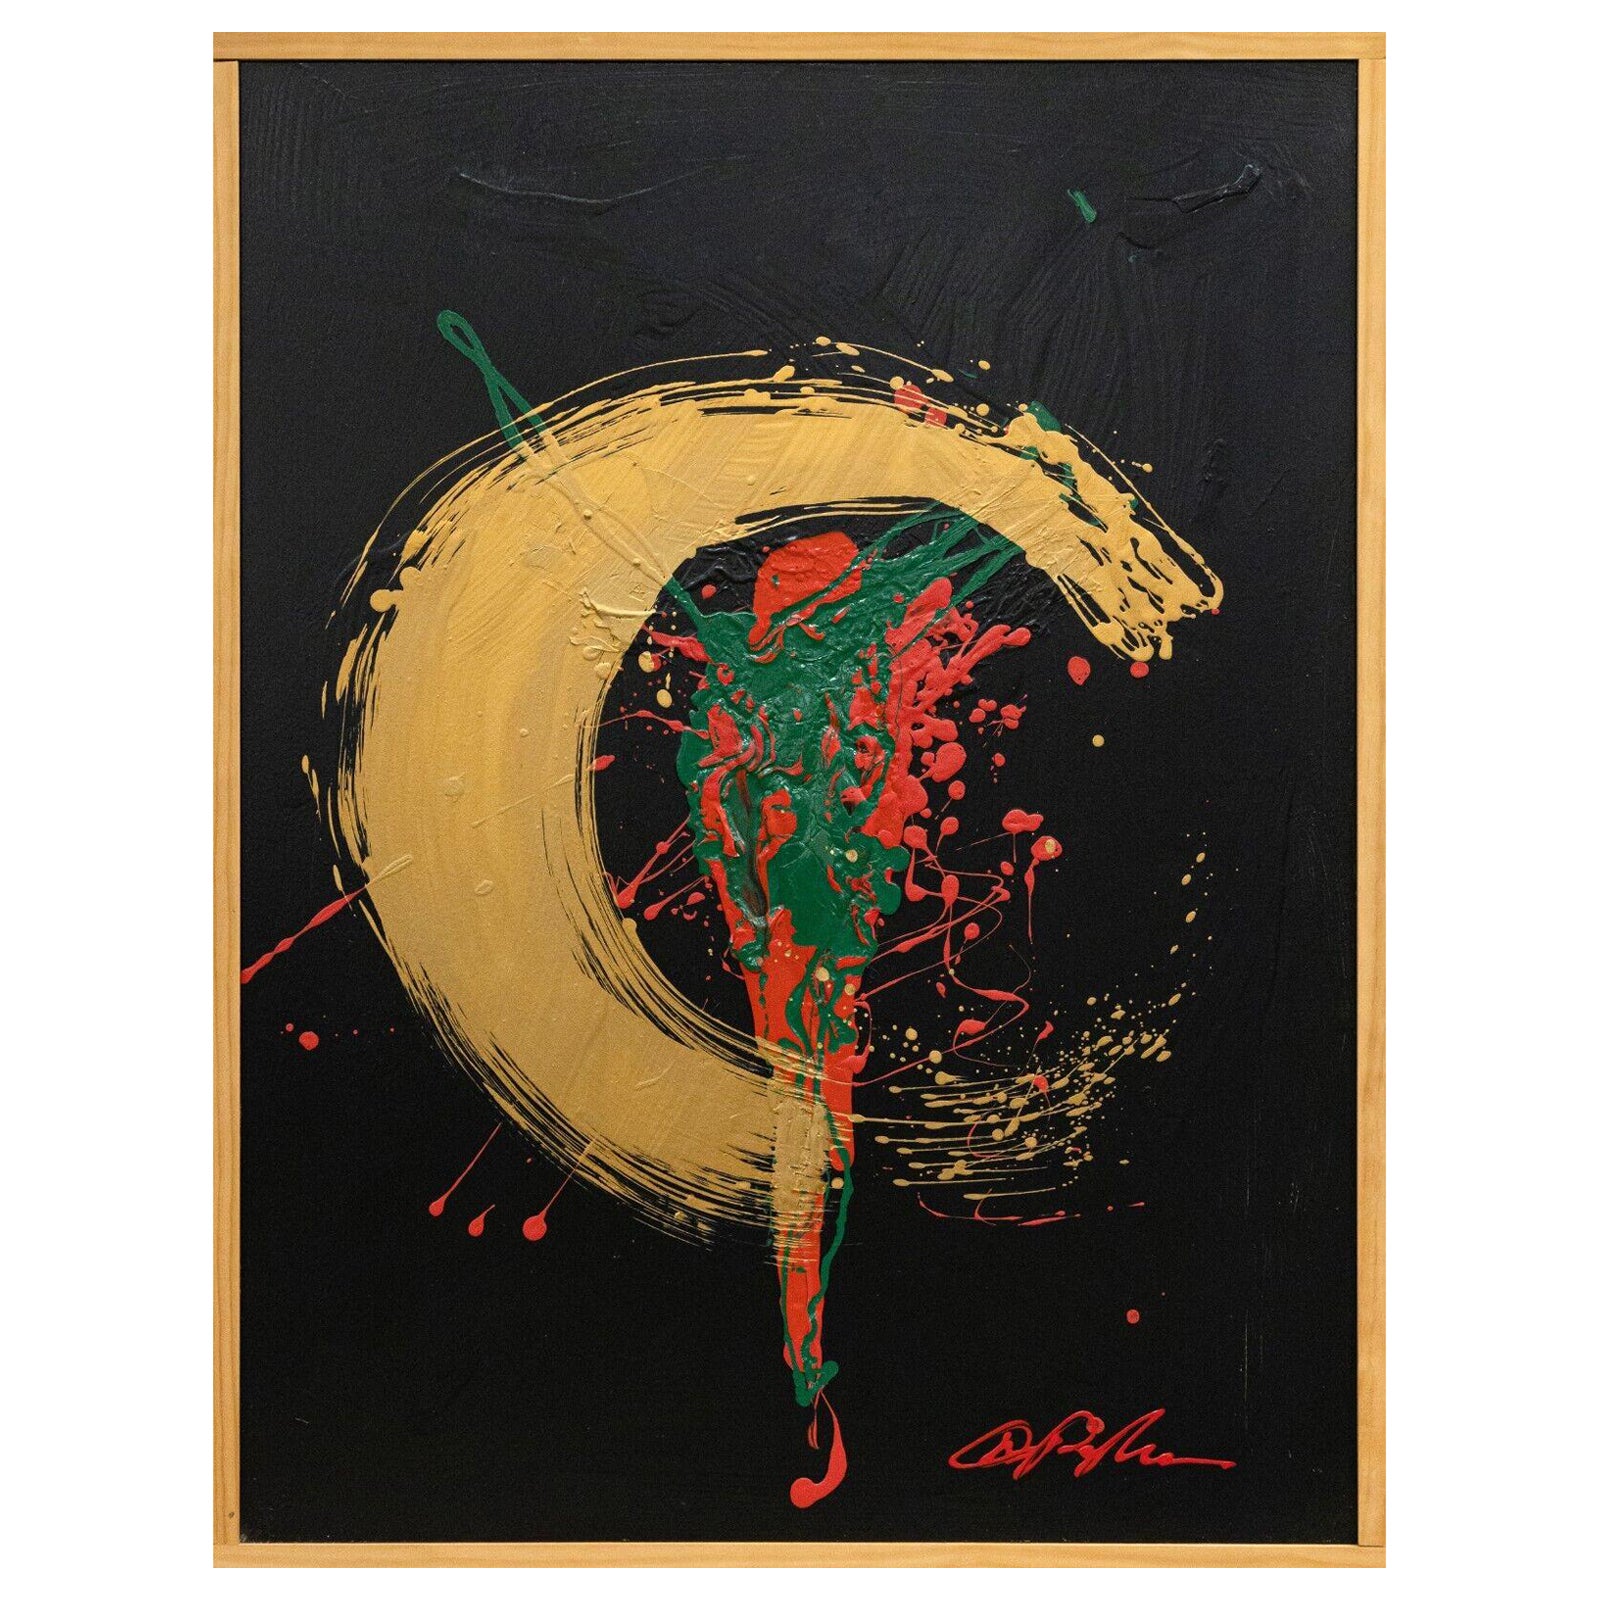 Dominic Pangborn Untitled Abstract Gold Swirl with Red & Green Painting on Board